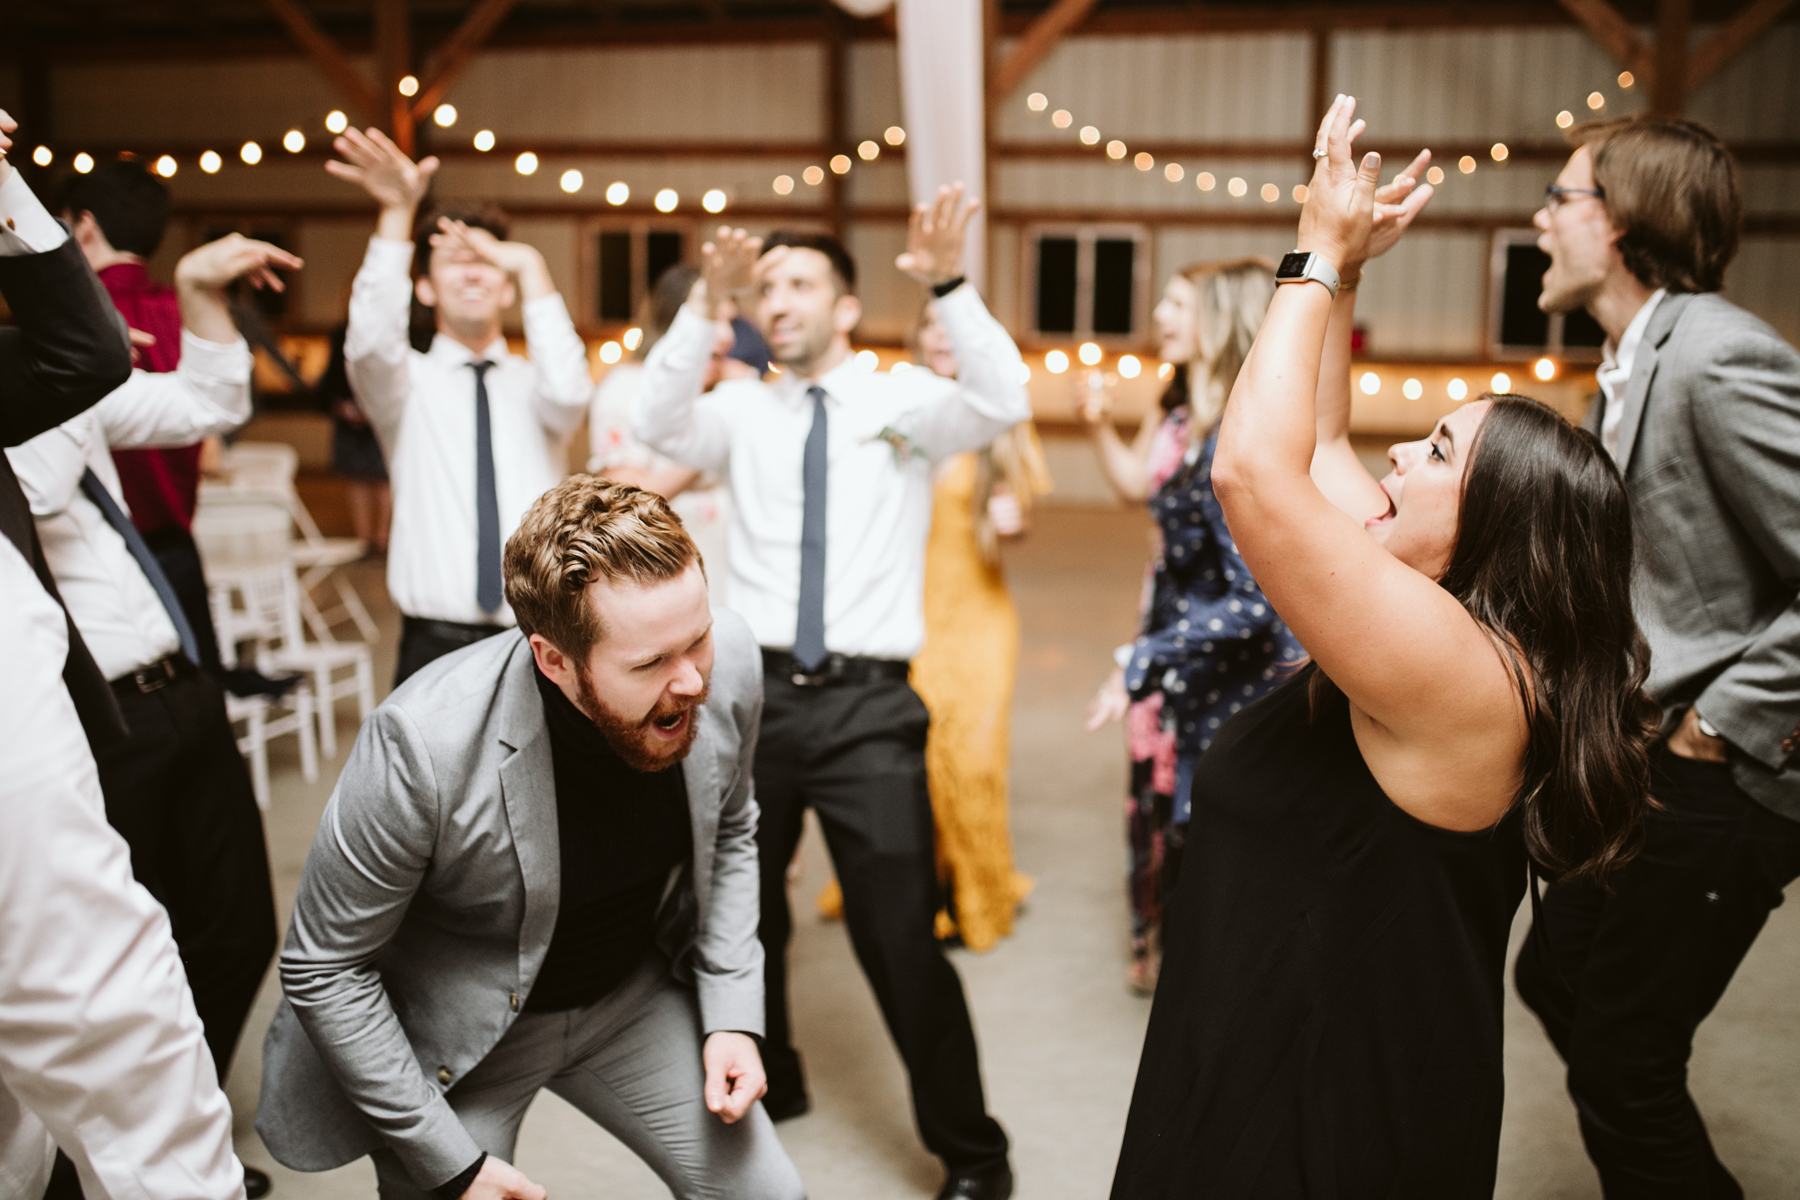 Dance floor during the reception of A Rustic Wedding at Barn in the Bend in Nashville, Tennessee